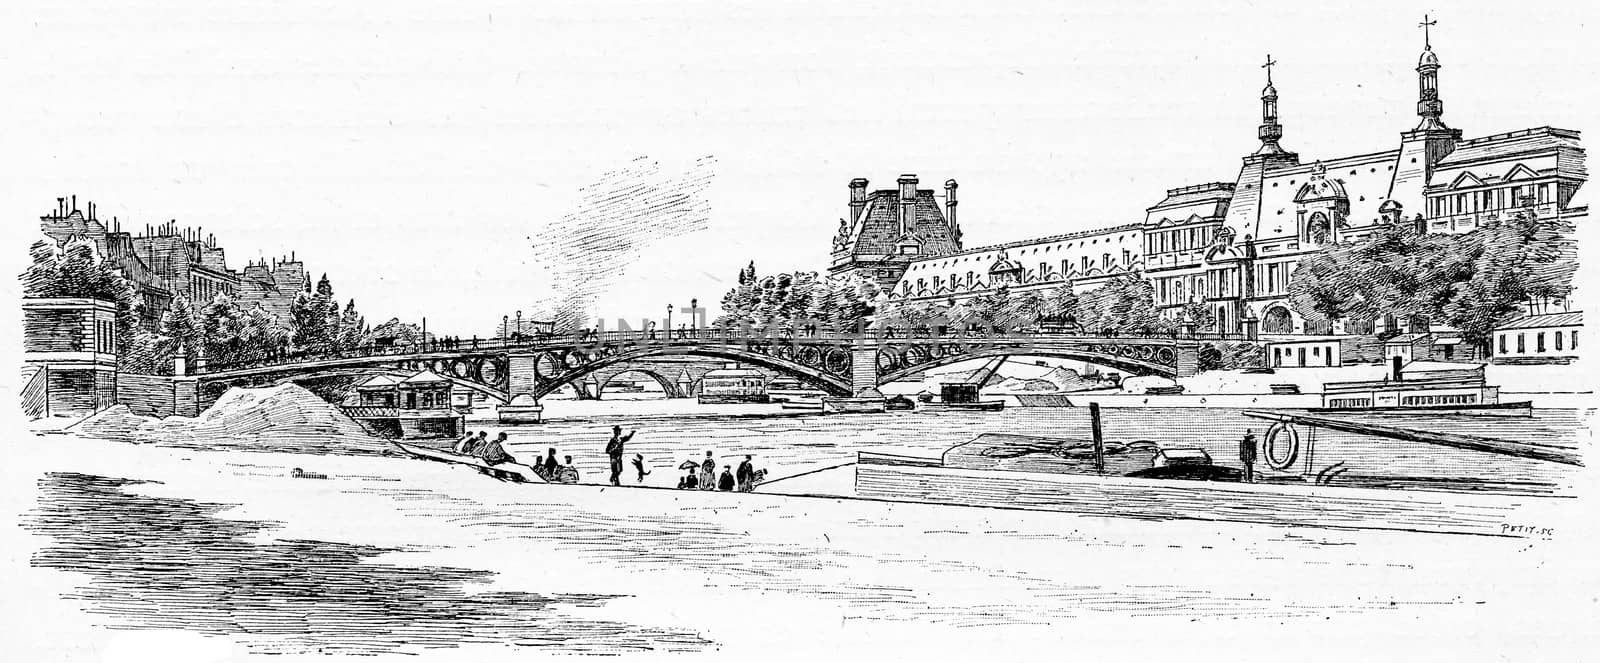 The Pont du Carrousel and the Louvre seen from the dock Malaquai by Morphart